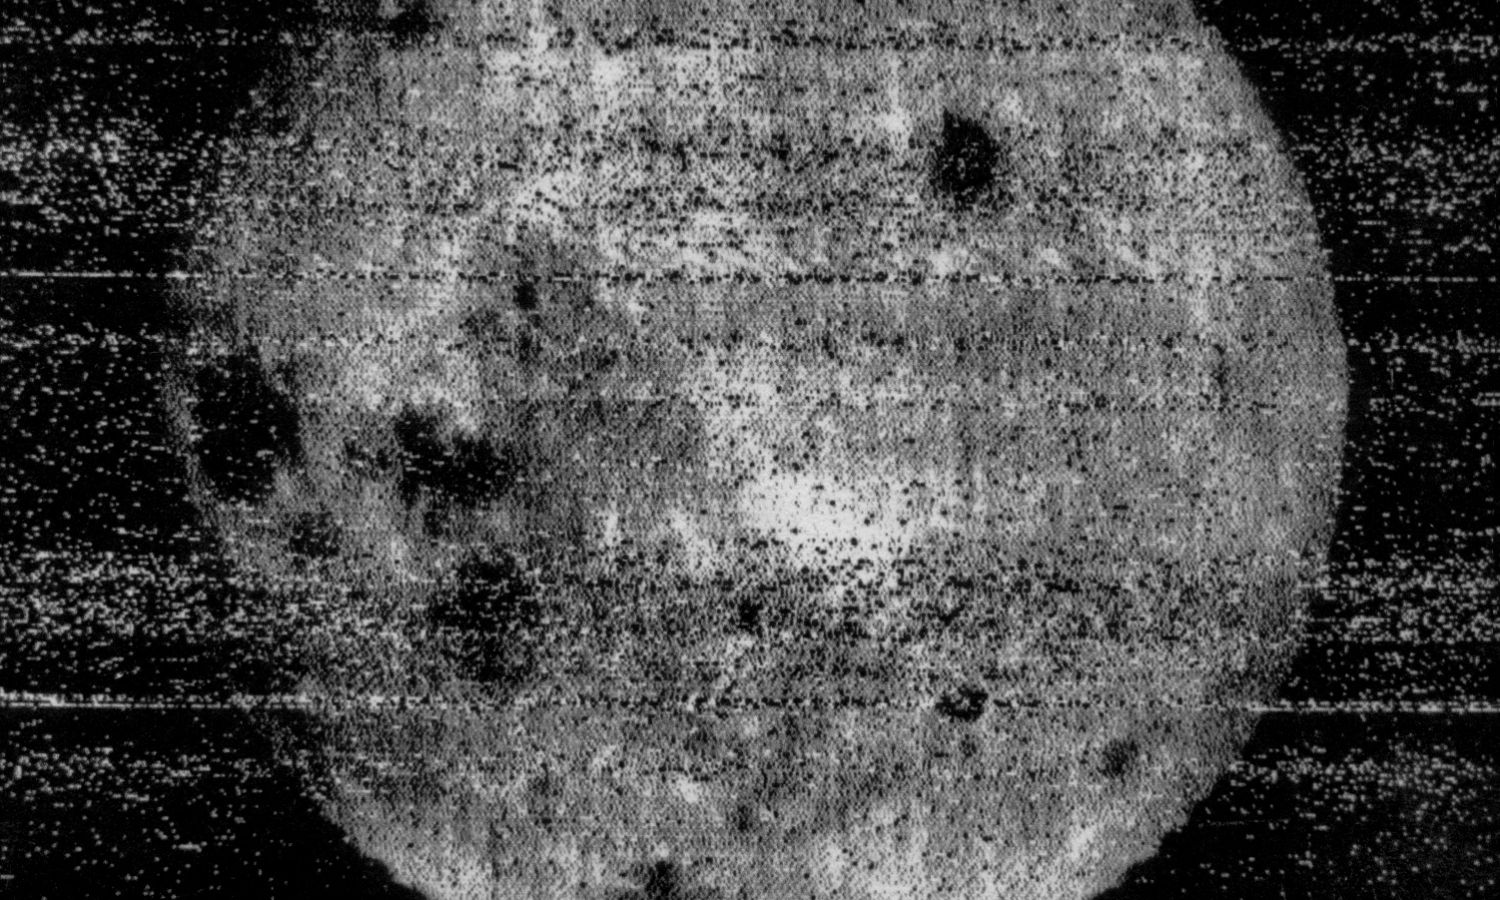 OTD in 1959: The Soviet spacecraft Luna 3 allowed the world to look at the far side of the moon for the first time.